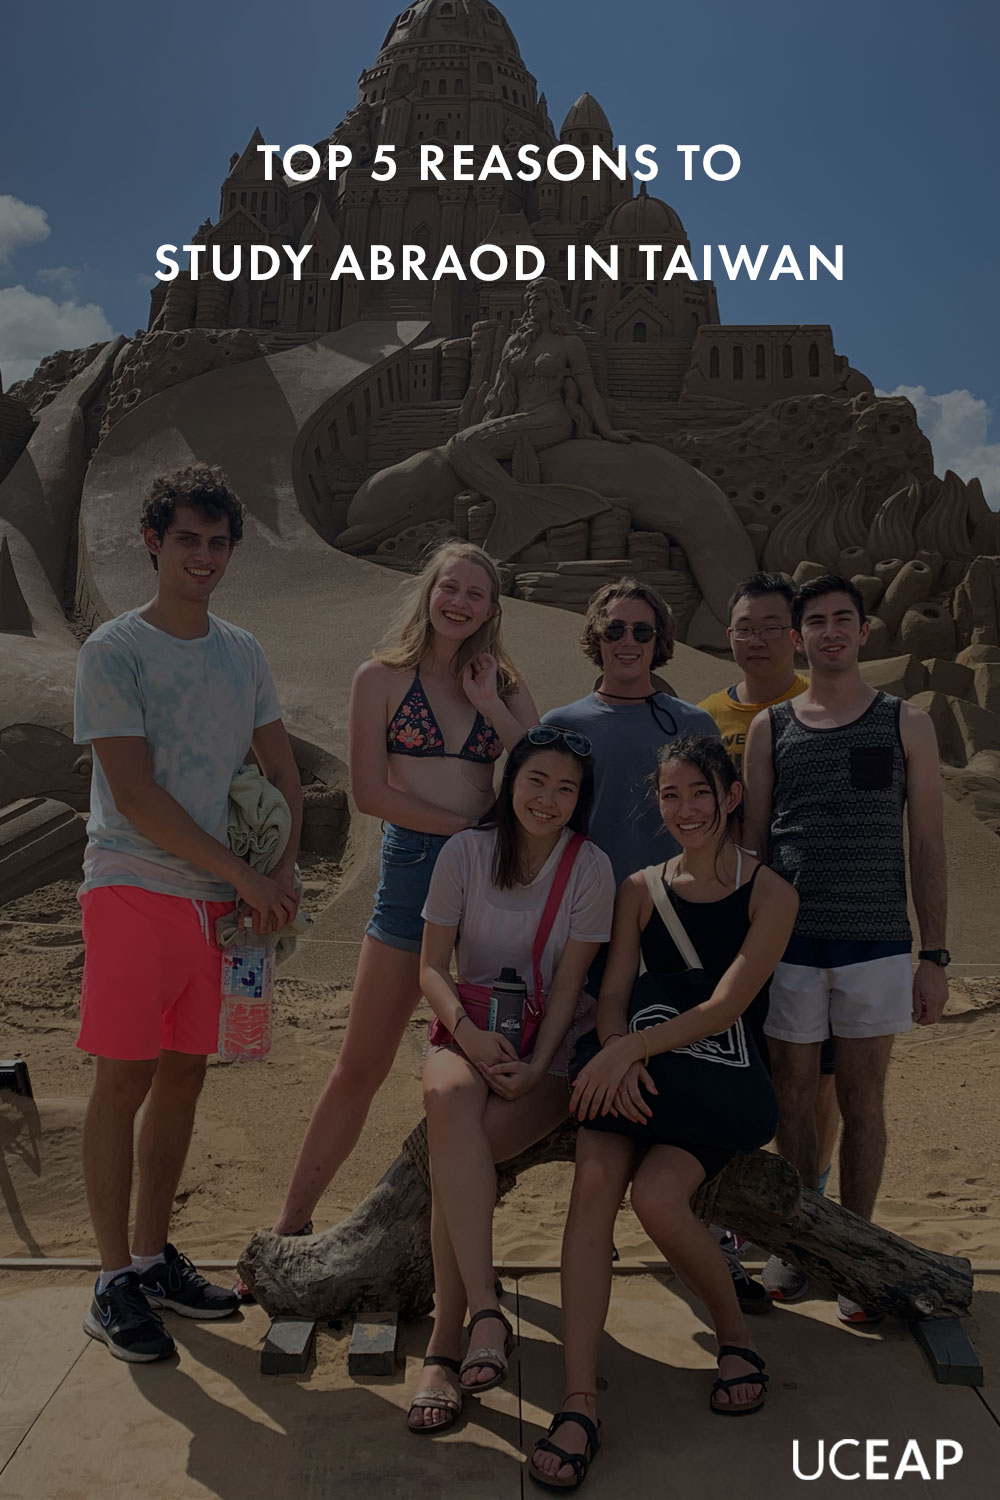 Student from UC Berkeley poses with friends at sand sculpture in Taiwan.